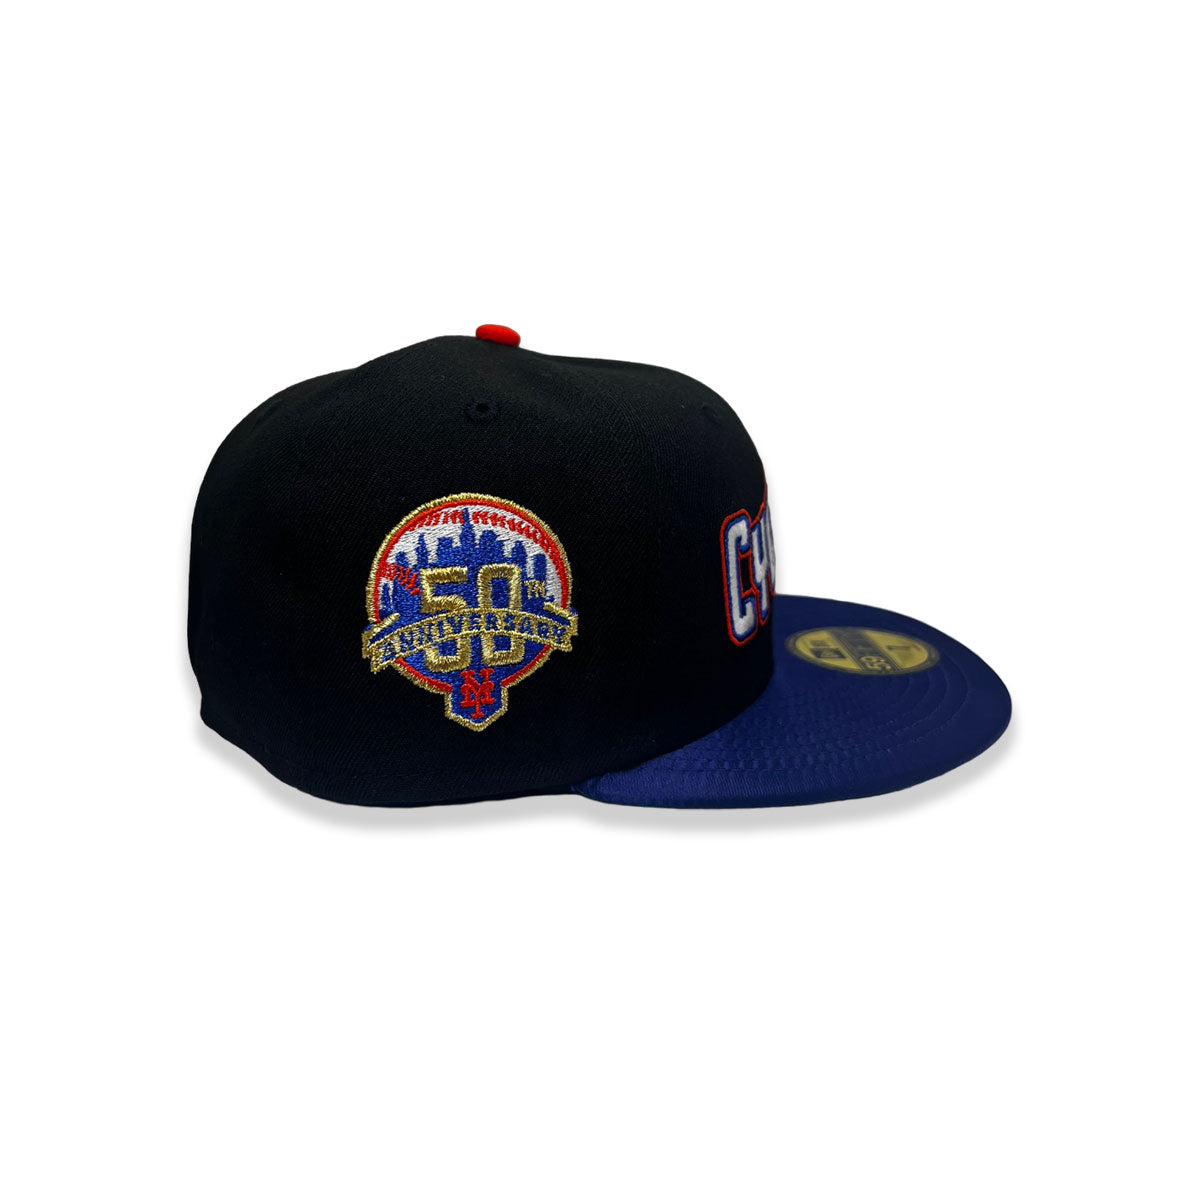 New Era Brooklyn Cyclones Mets 50th Anniversary 59Fifty Fitted